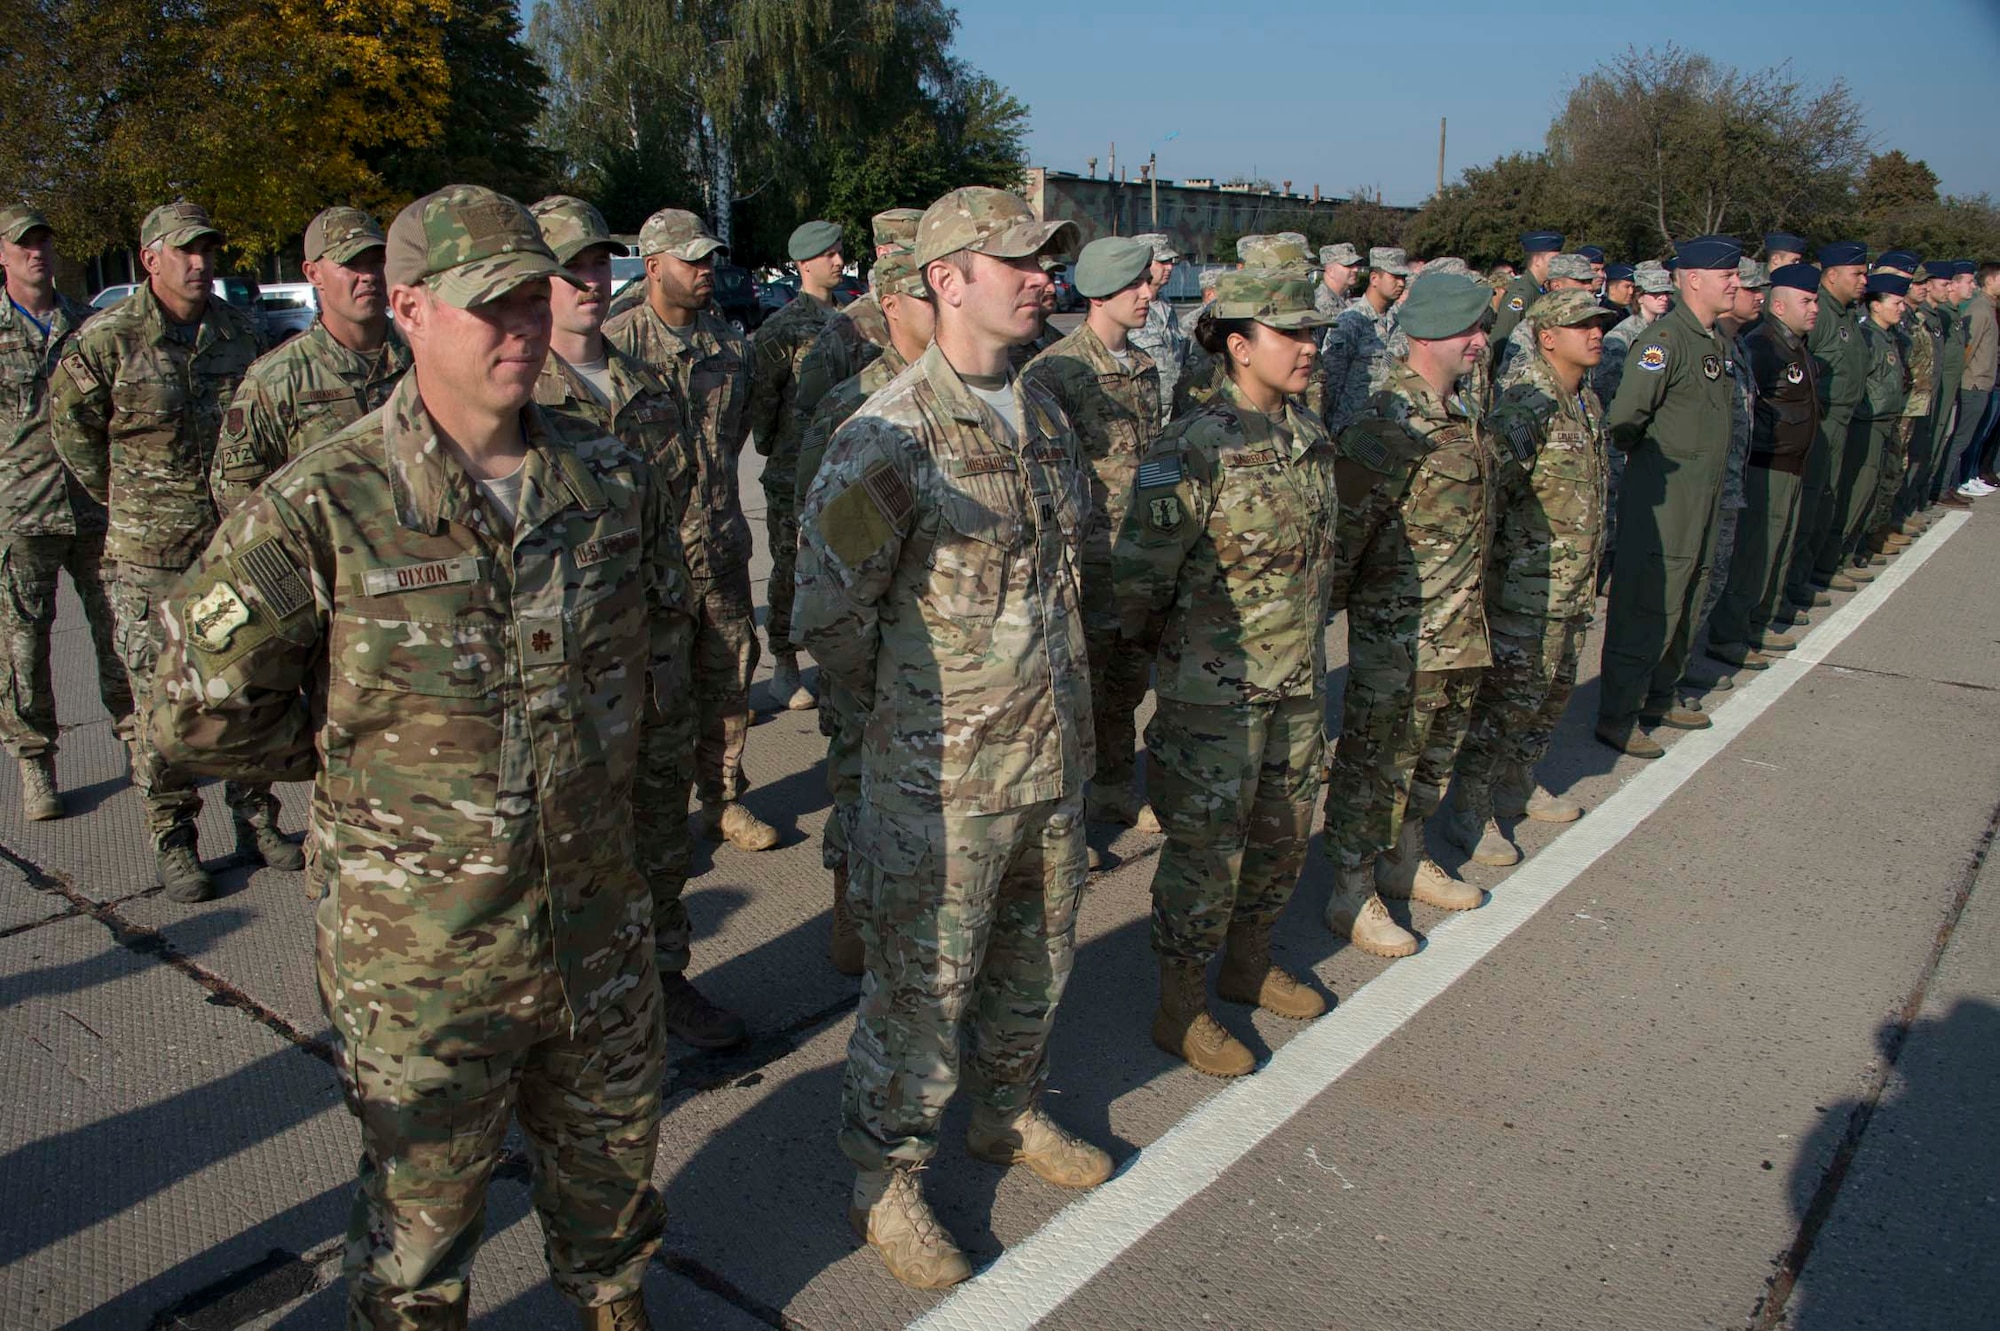 A formation of Americans, Estonians, Swiss, and Ukrainian military stand at the opening ceremony of exercise Clear Sky 2018 Oct. 8, 2018 at Vinnytisa Air Base, Ukraine. Clear Sky was a multi-national exercise aimed to promote peace, security and interoperability between regional allies as well as NATO partners. The two-week exercise brought together nearly 1,000 military personnel from nine countries. (U.S. Air National Guard photo by Master Sgt. Joseph Prouse)